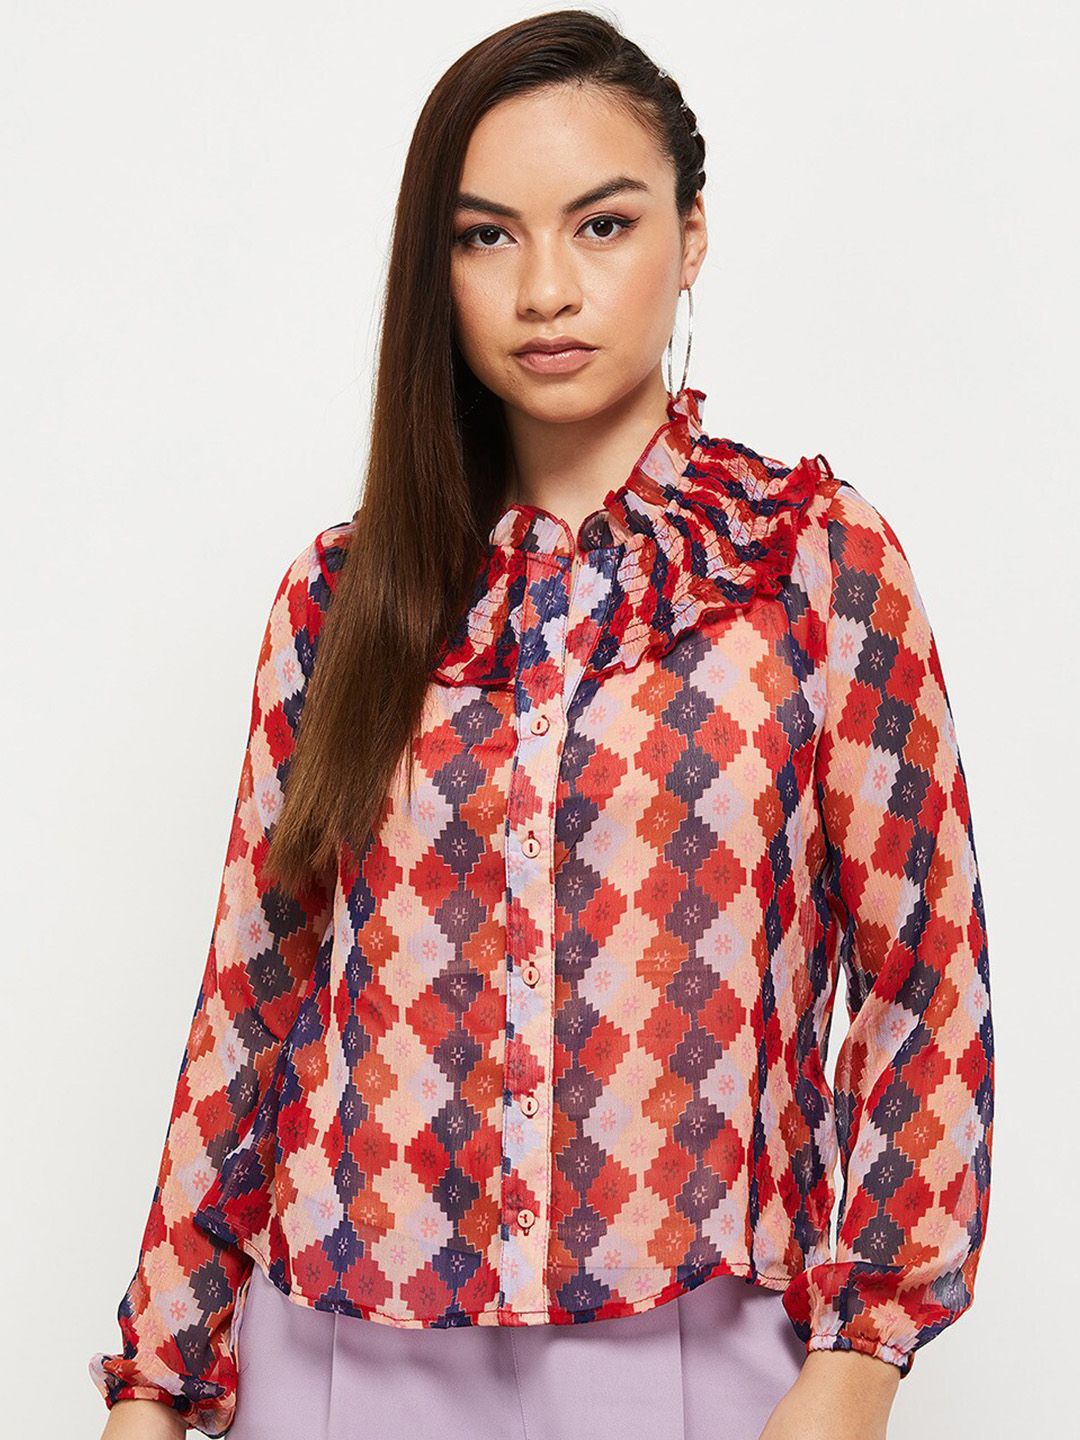 max Red & Blue Geometric Print Tie-Up Neck Shirt Style Top Price in India